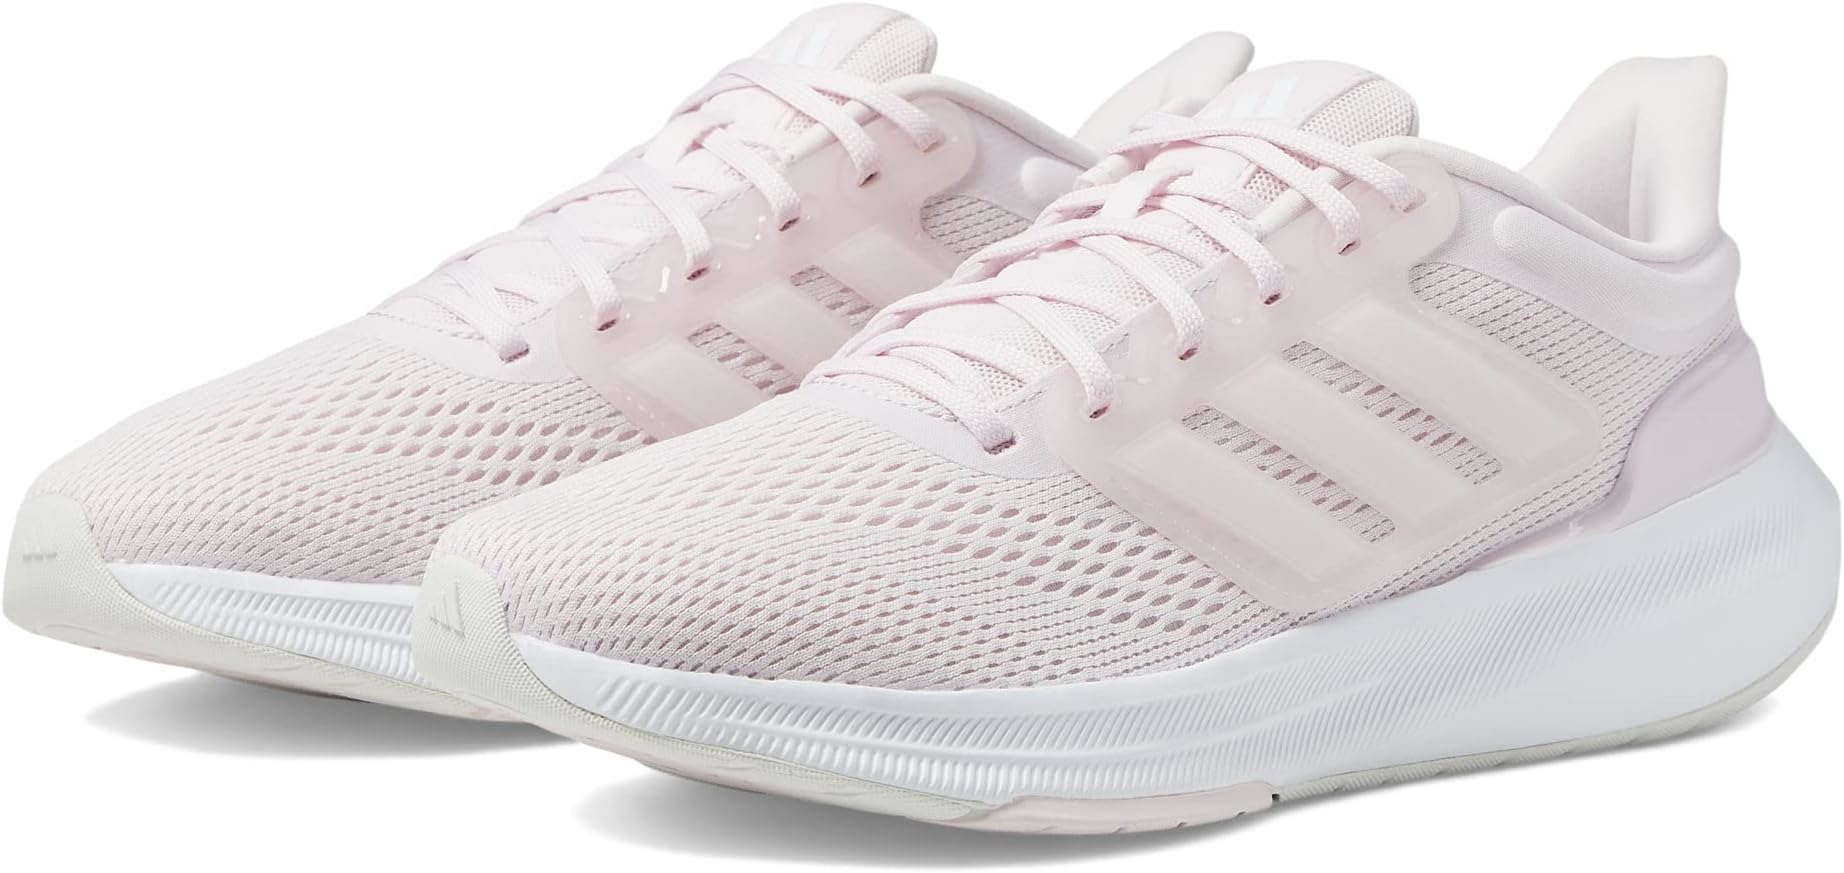 Кроссовки Ultrabounce adidas, цвет Almost Pink/White/Crystal White